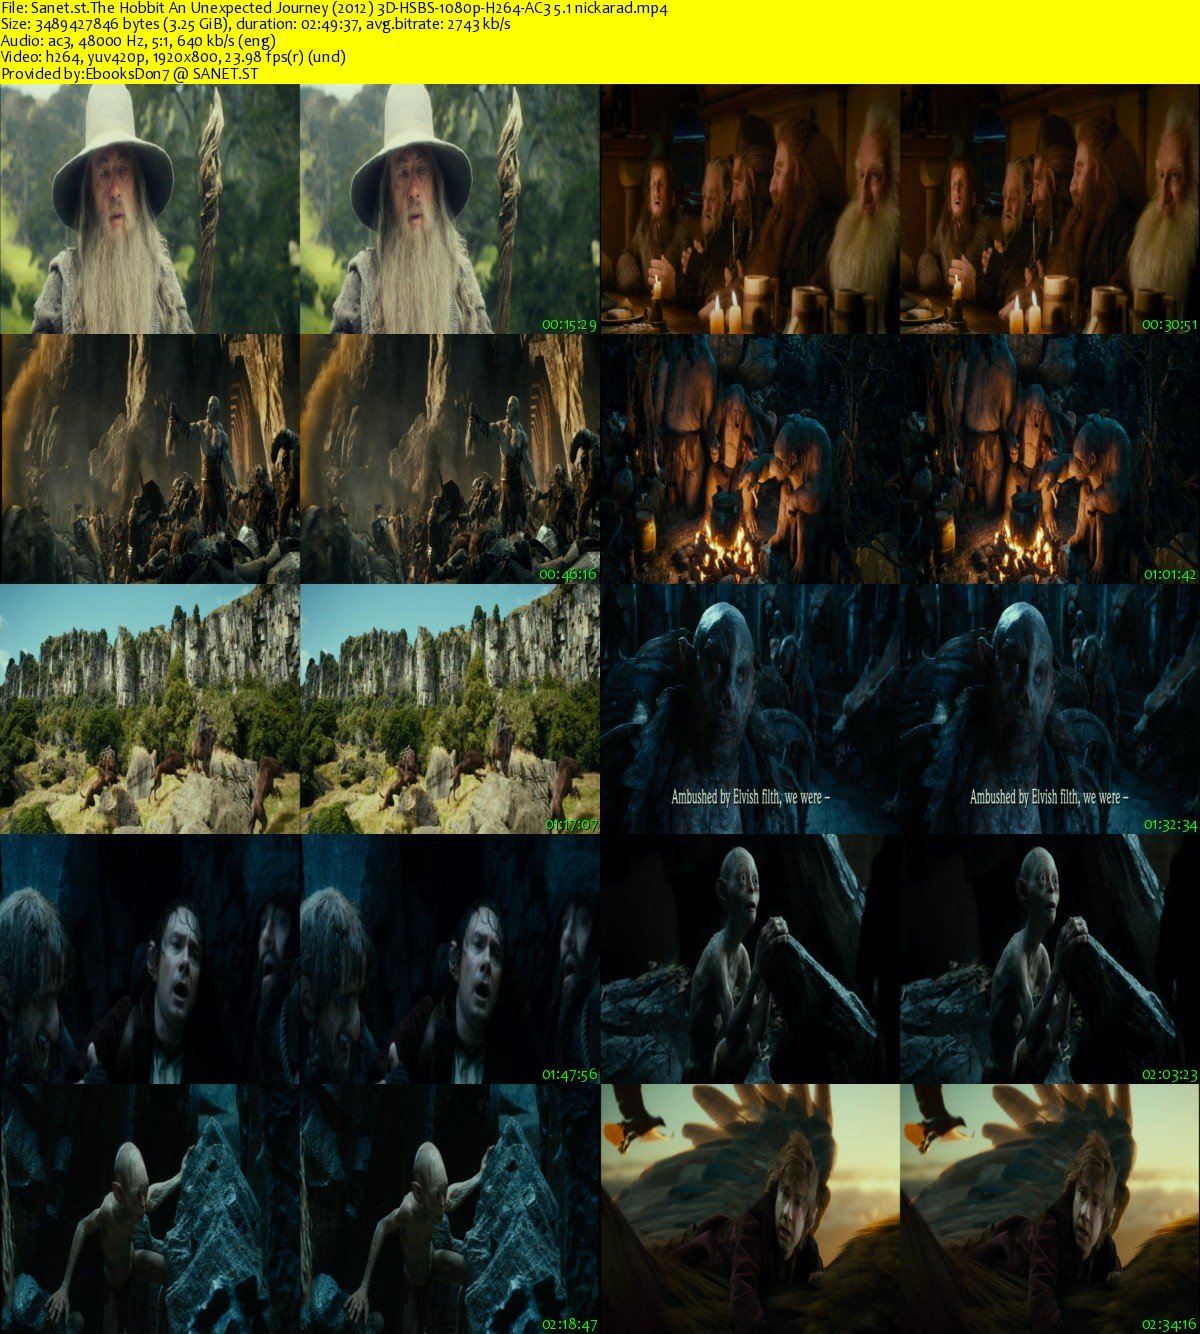 download the new for android The Hobbit: An Unexpected Journey